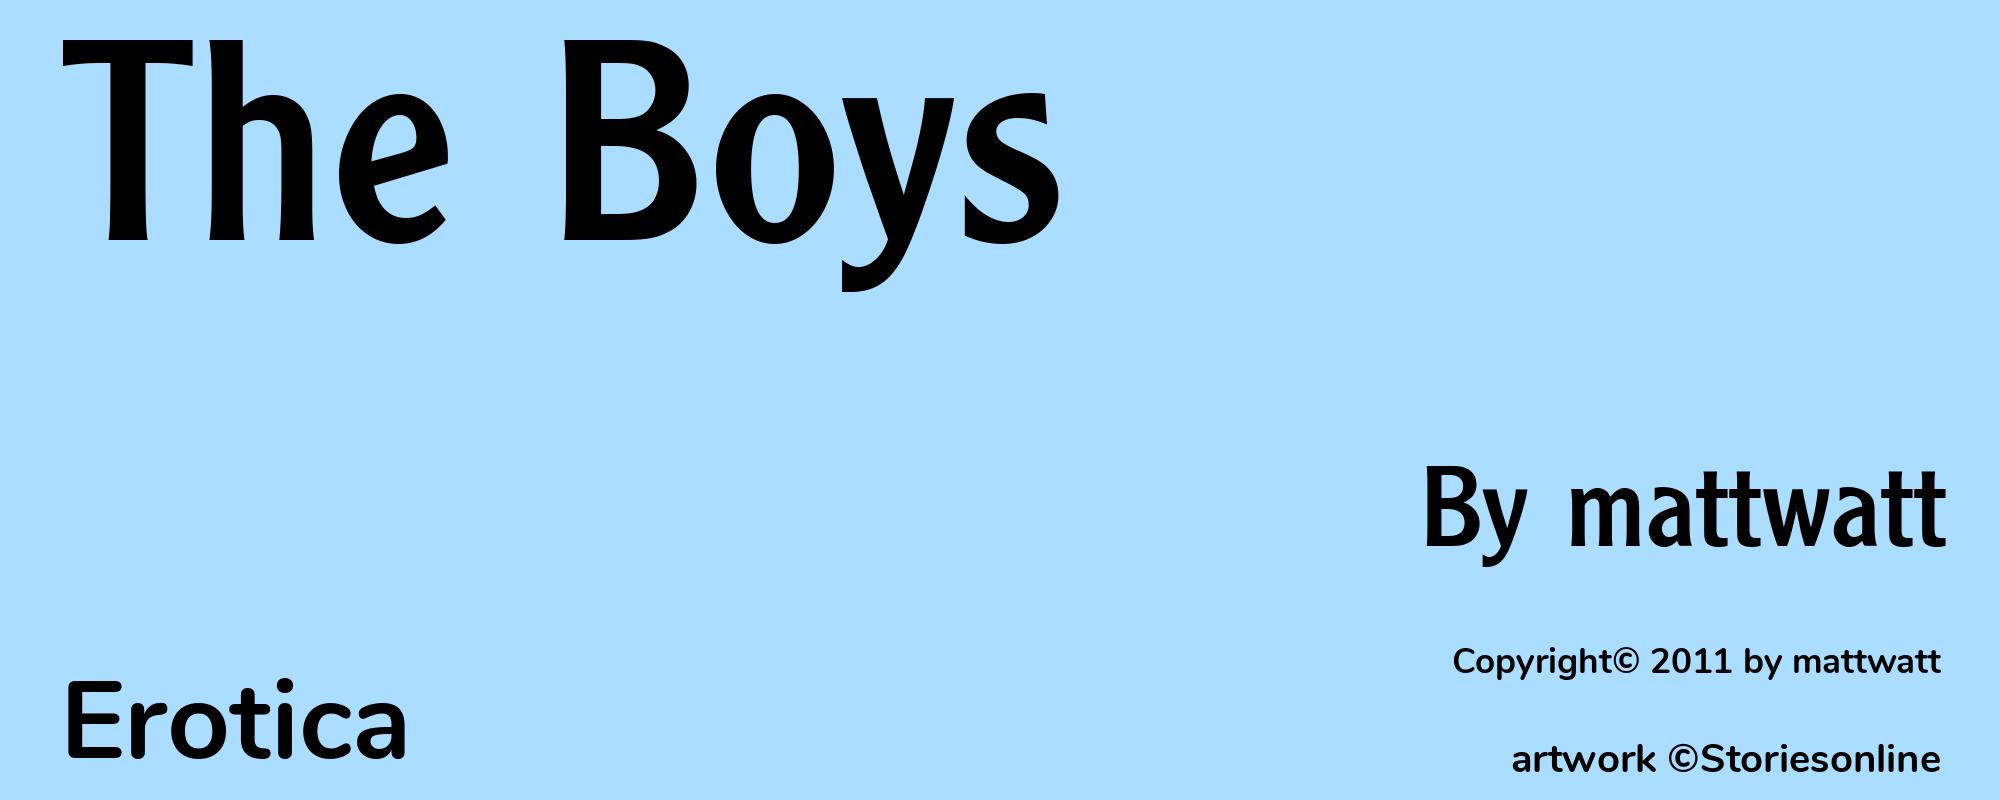 The Boys - Cover